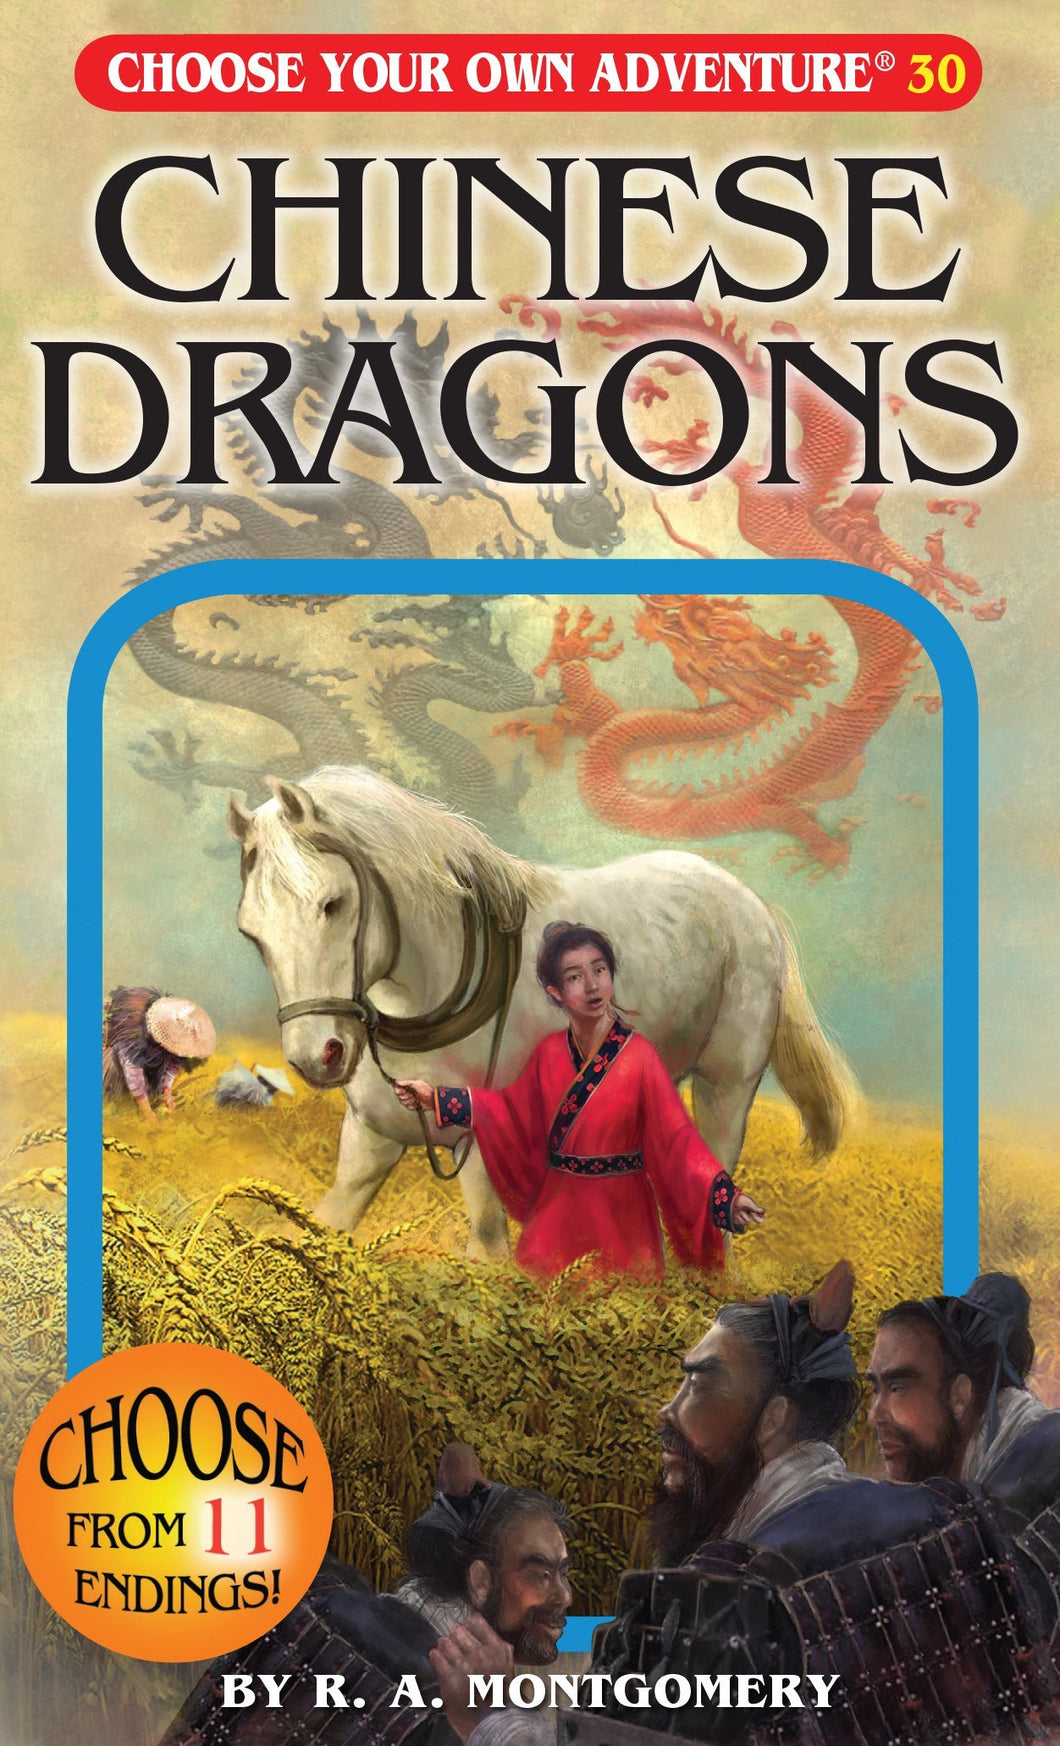 Choose Your Own Adventure Book-Chinese Dragons #30